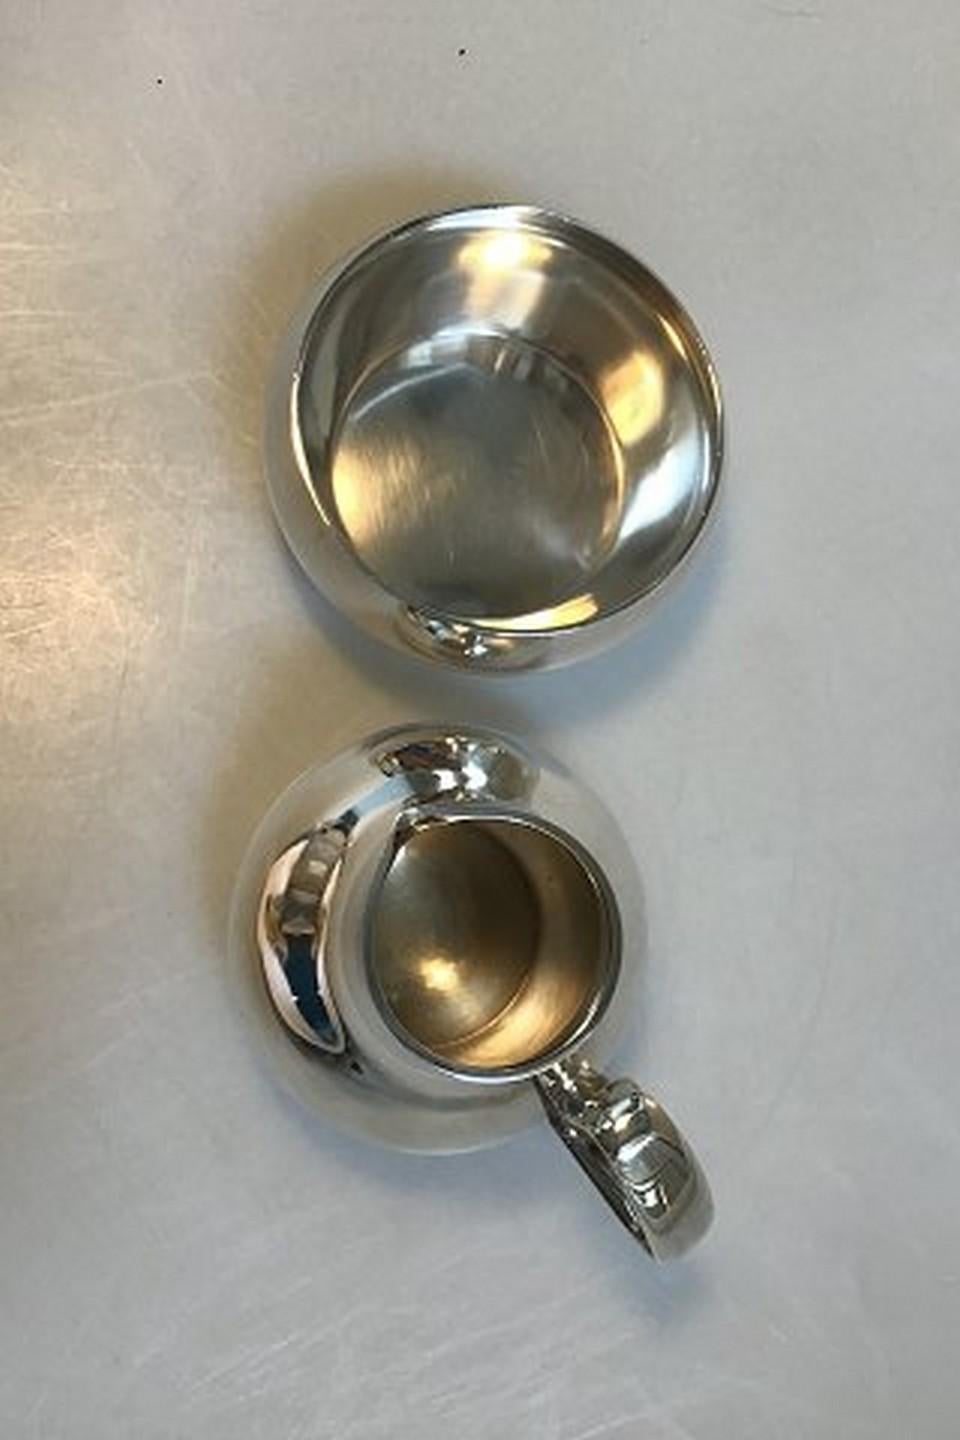 Mid-Century Modern Georg Jensen Sterling Silver Henning Koppel Tea and Coffee Set with Tray No 1017 For Sale